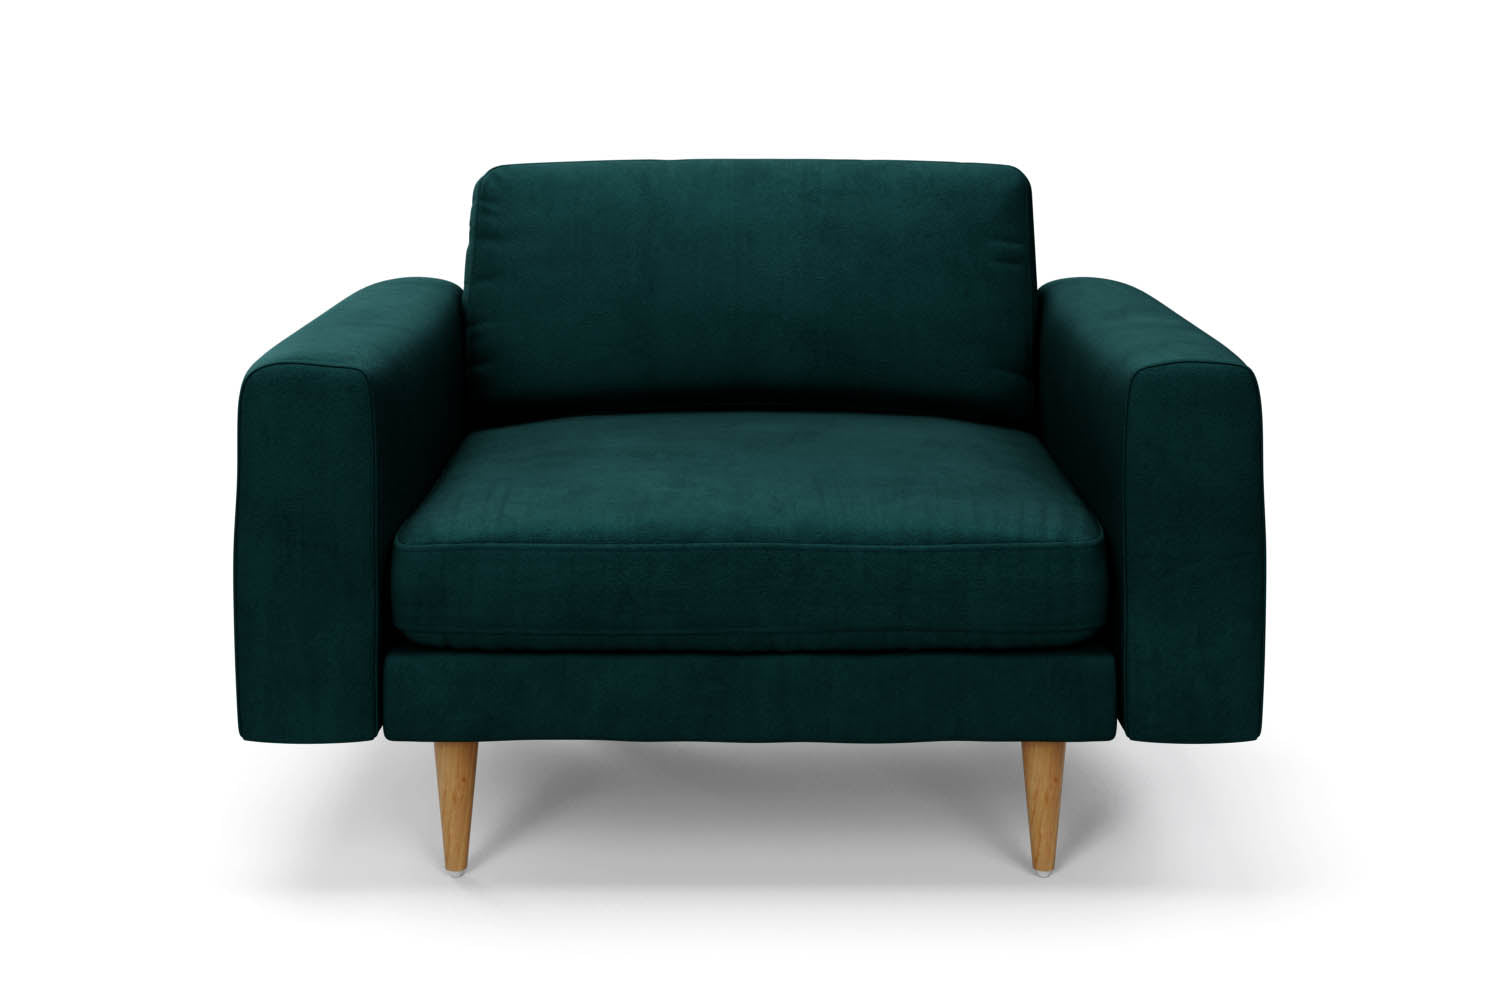 SNUG | The Big Chill 1.5 Seater Snuggler in Pine Green variant_40837198282800